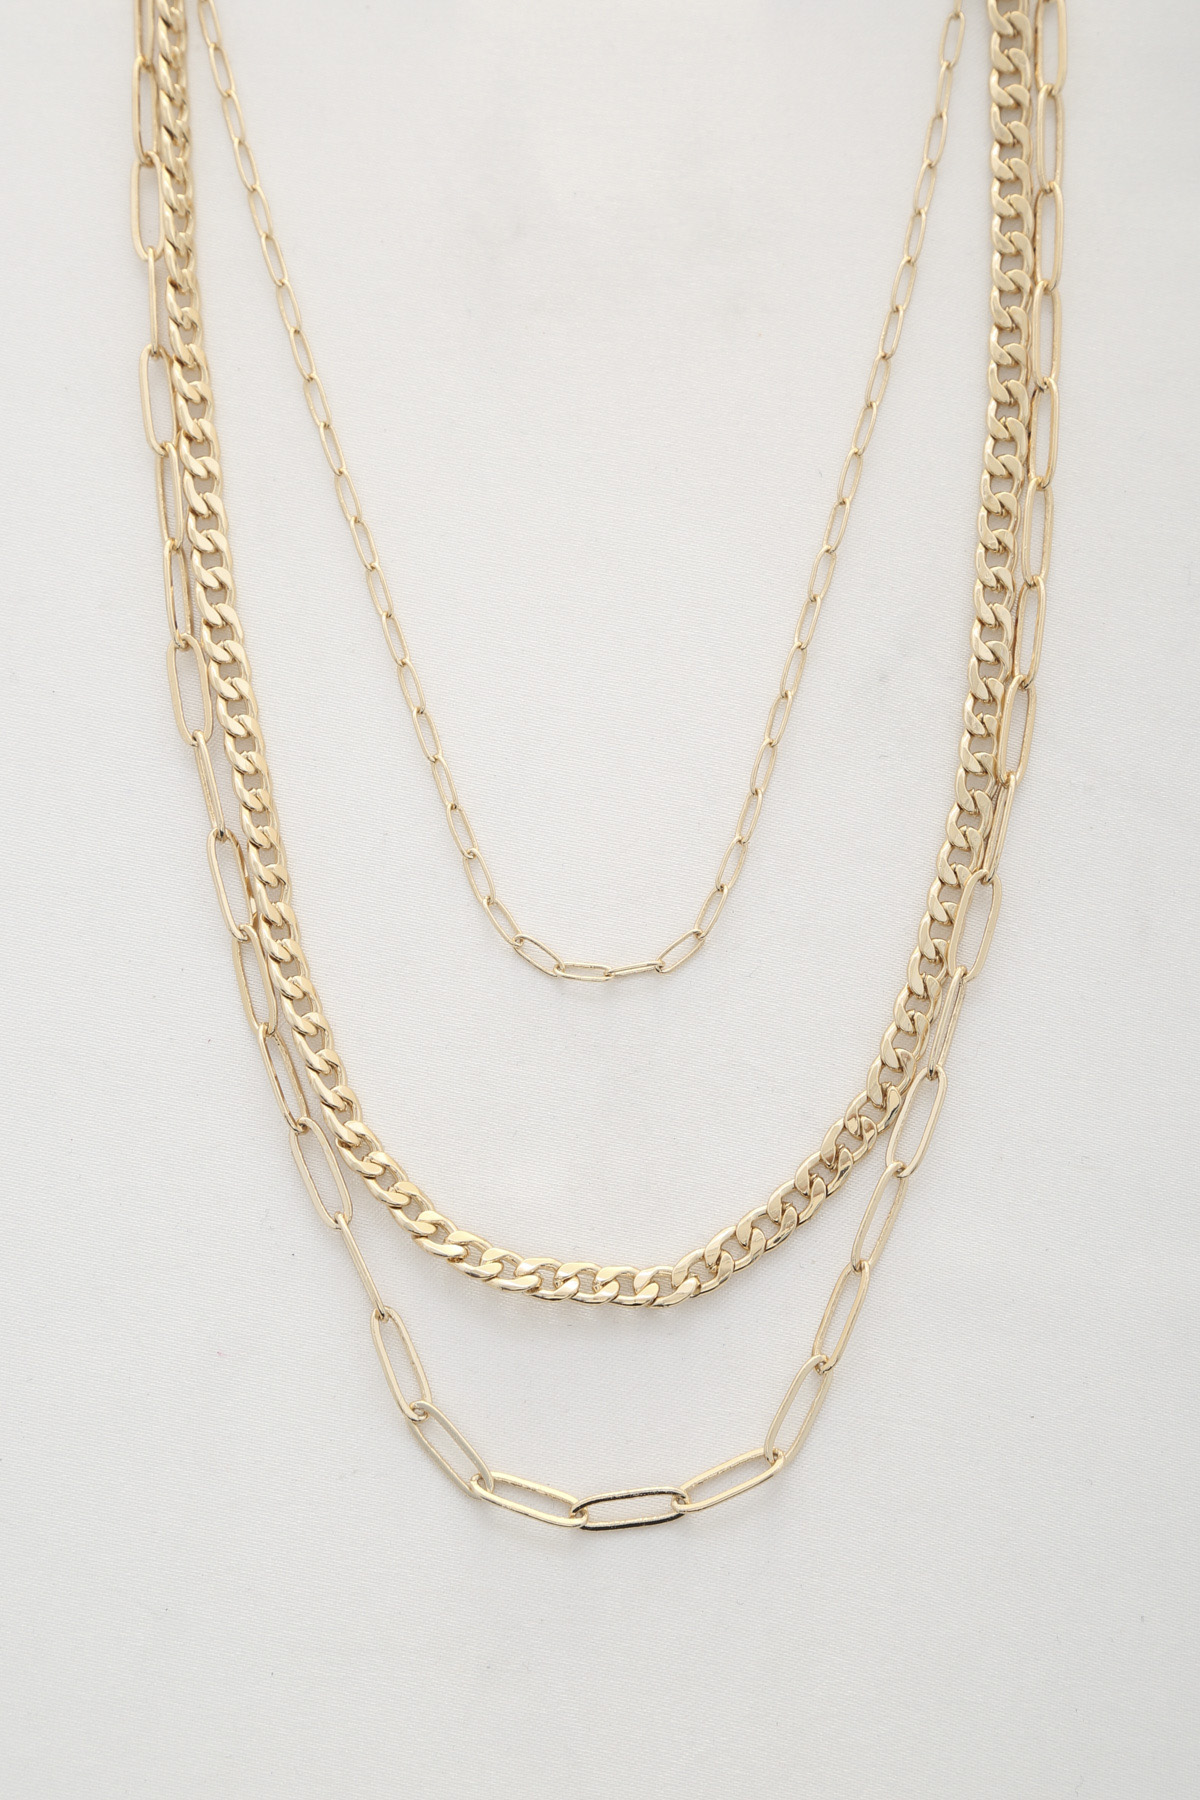 SODAJO CURB OVAL LINK LAYERED NECKLACE